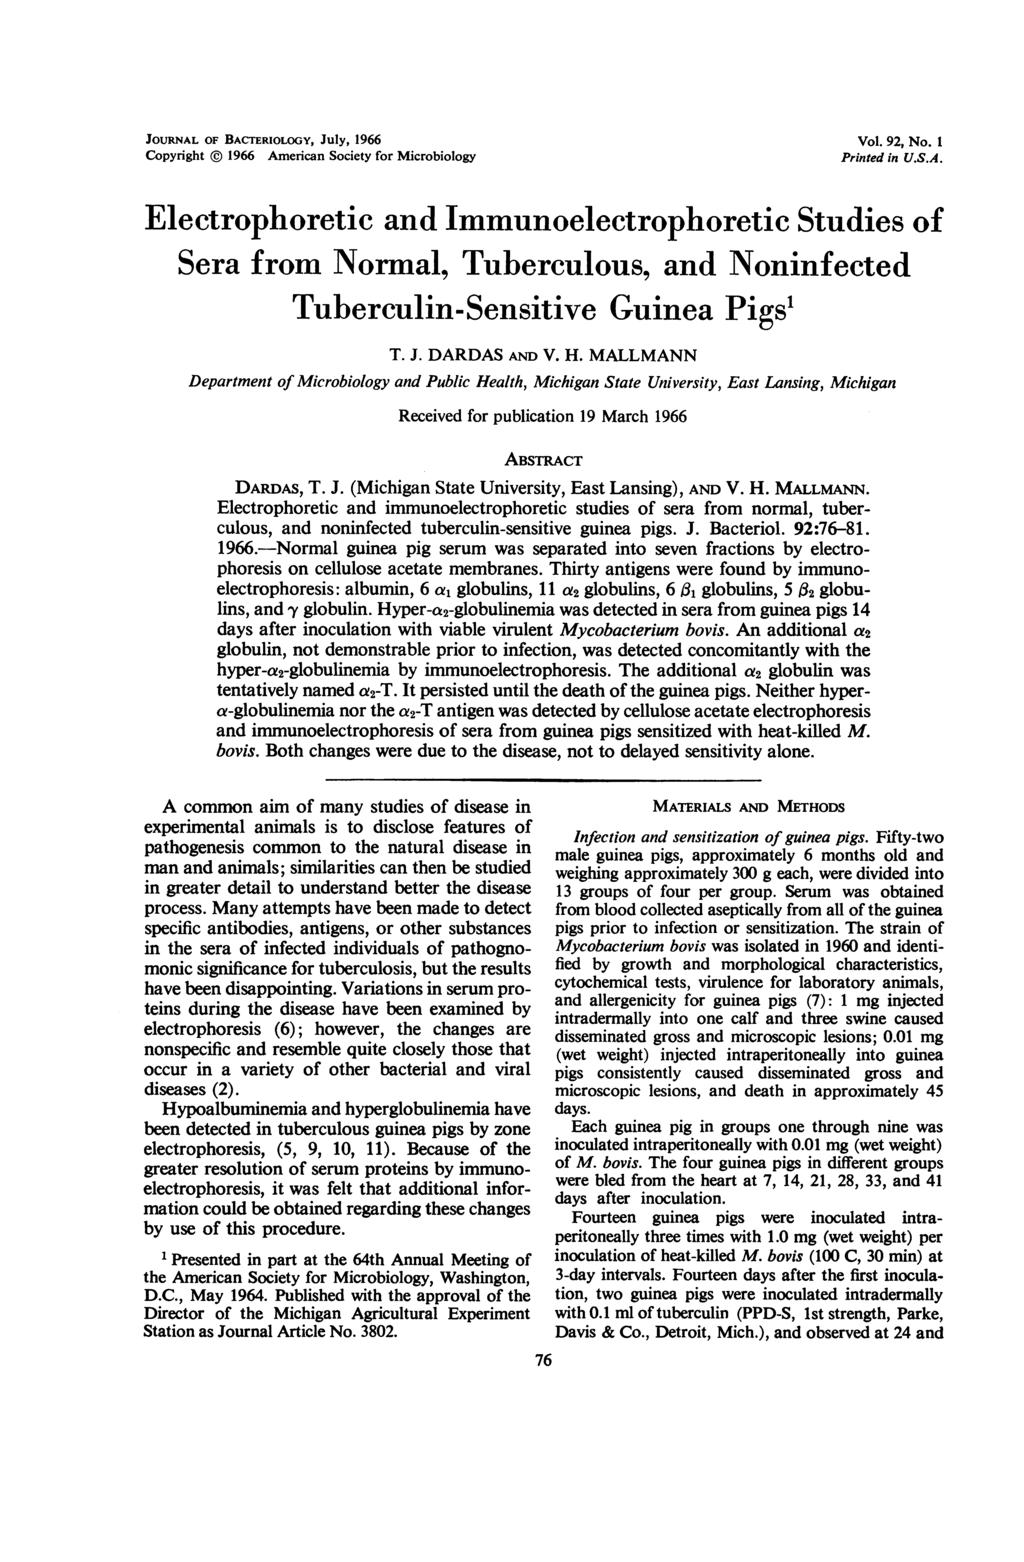 JOURNAL OF BACTERIOLOGY, July, 1966 Copyright 1966 American Society for Microbiology Vol. 92, No. I Printed in U.S.A. Electrophoretic and Immunoelectrophoretic Studies of Sera from Normal, Tuberculous, and Noninfected Tuberculin-Sensitive Guinea Pigst T.